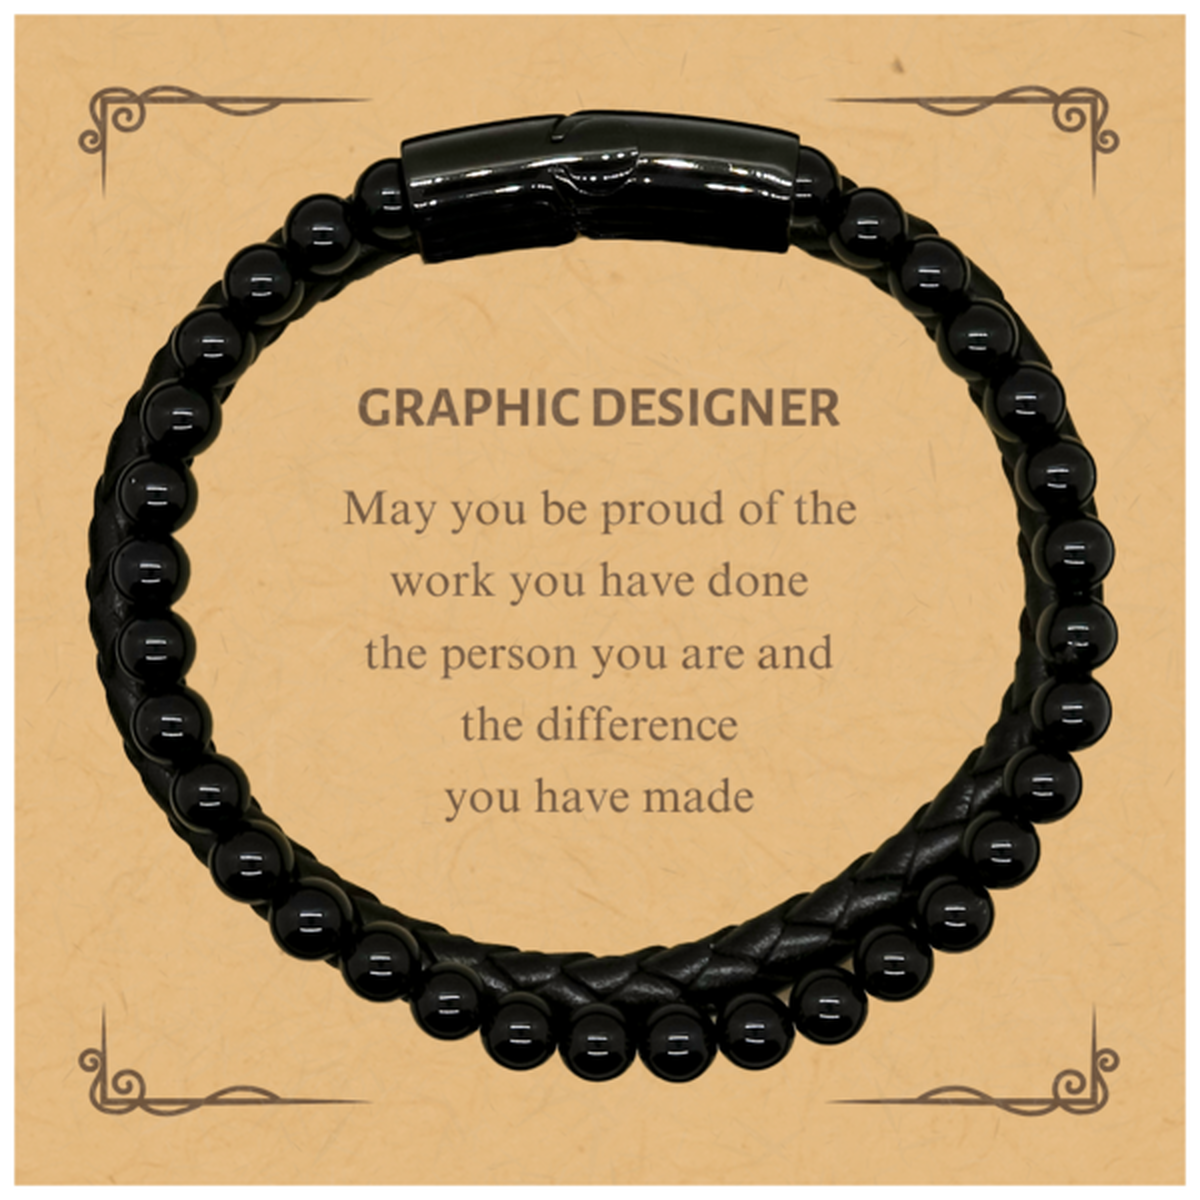 Graphic Designer May you be proud of the work you have done, Retirement Graphic Designer Stone Leather Bracelets for Colleague Appreciation Gifts Amazing for Graphic Designer